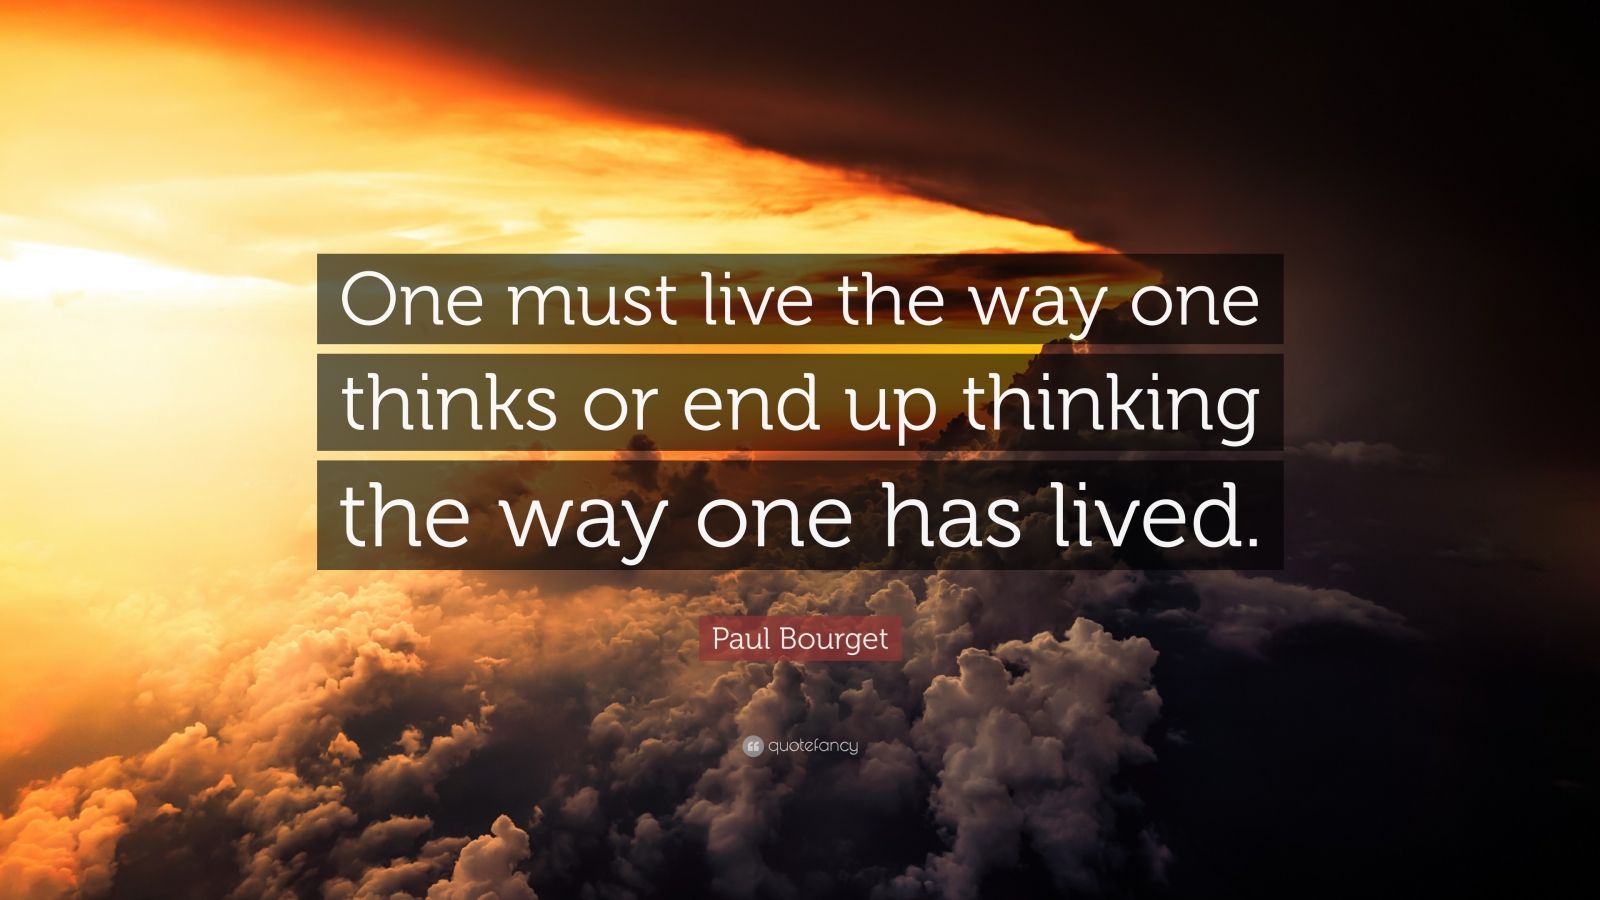 Paul Bourget Quote: “One must live the way one thinks or end up ...